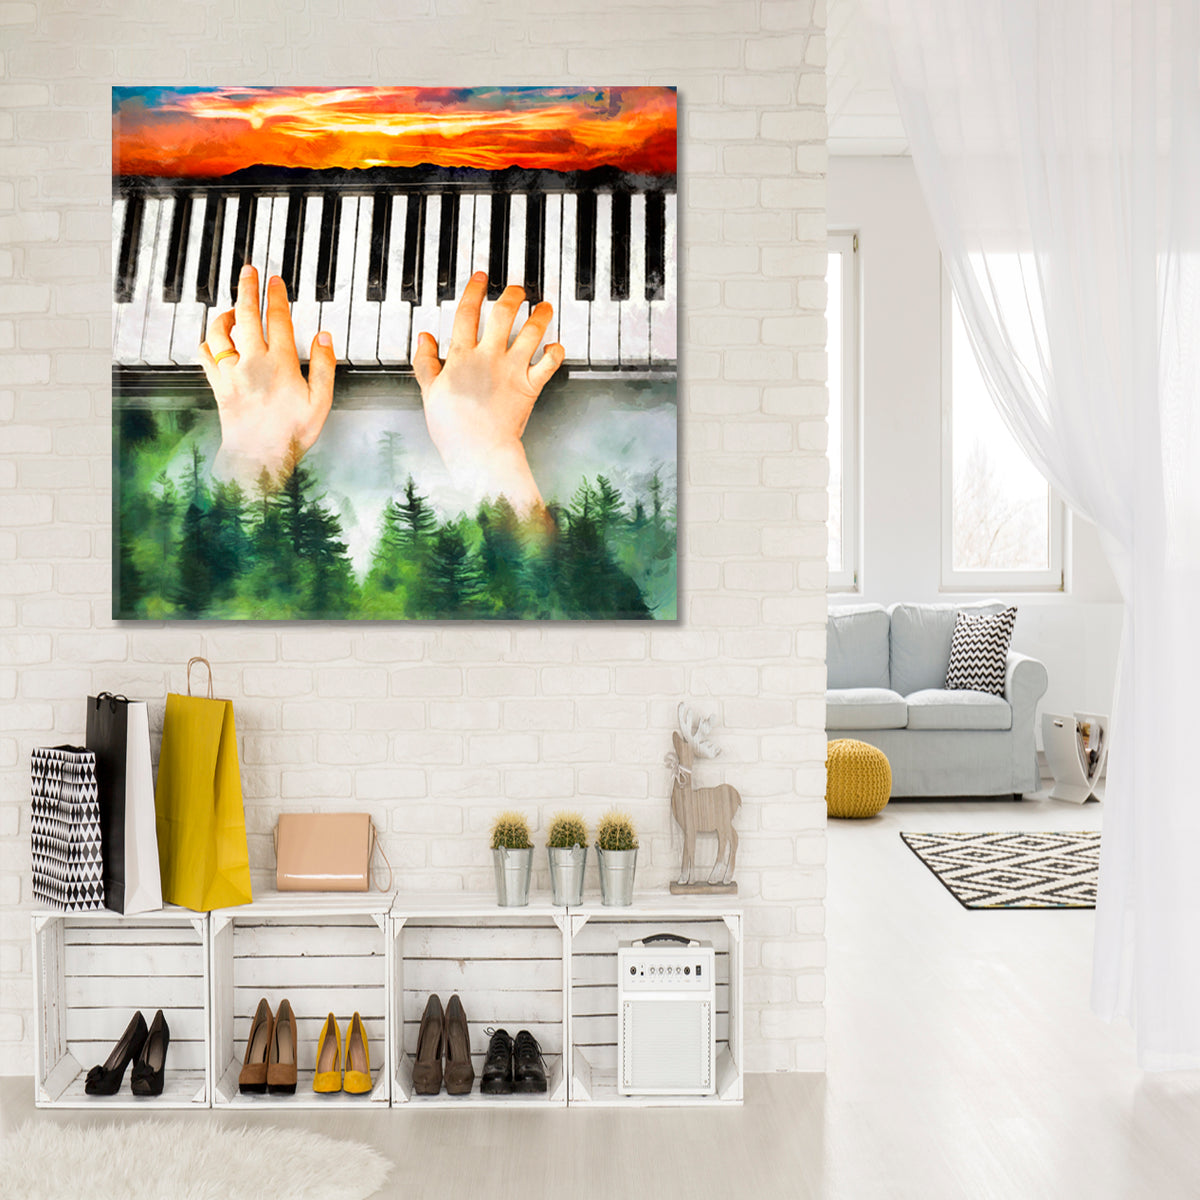 MUSIC SOUL OF NATURE Pianists Hands Landscape Modern Abstract Music Wall Panels Artesty 1 Panel 12"x12" 